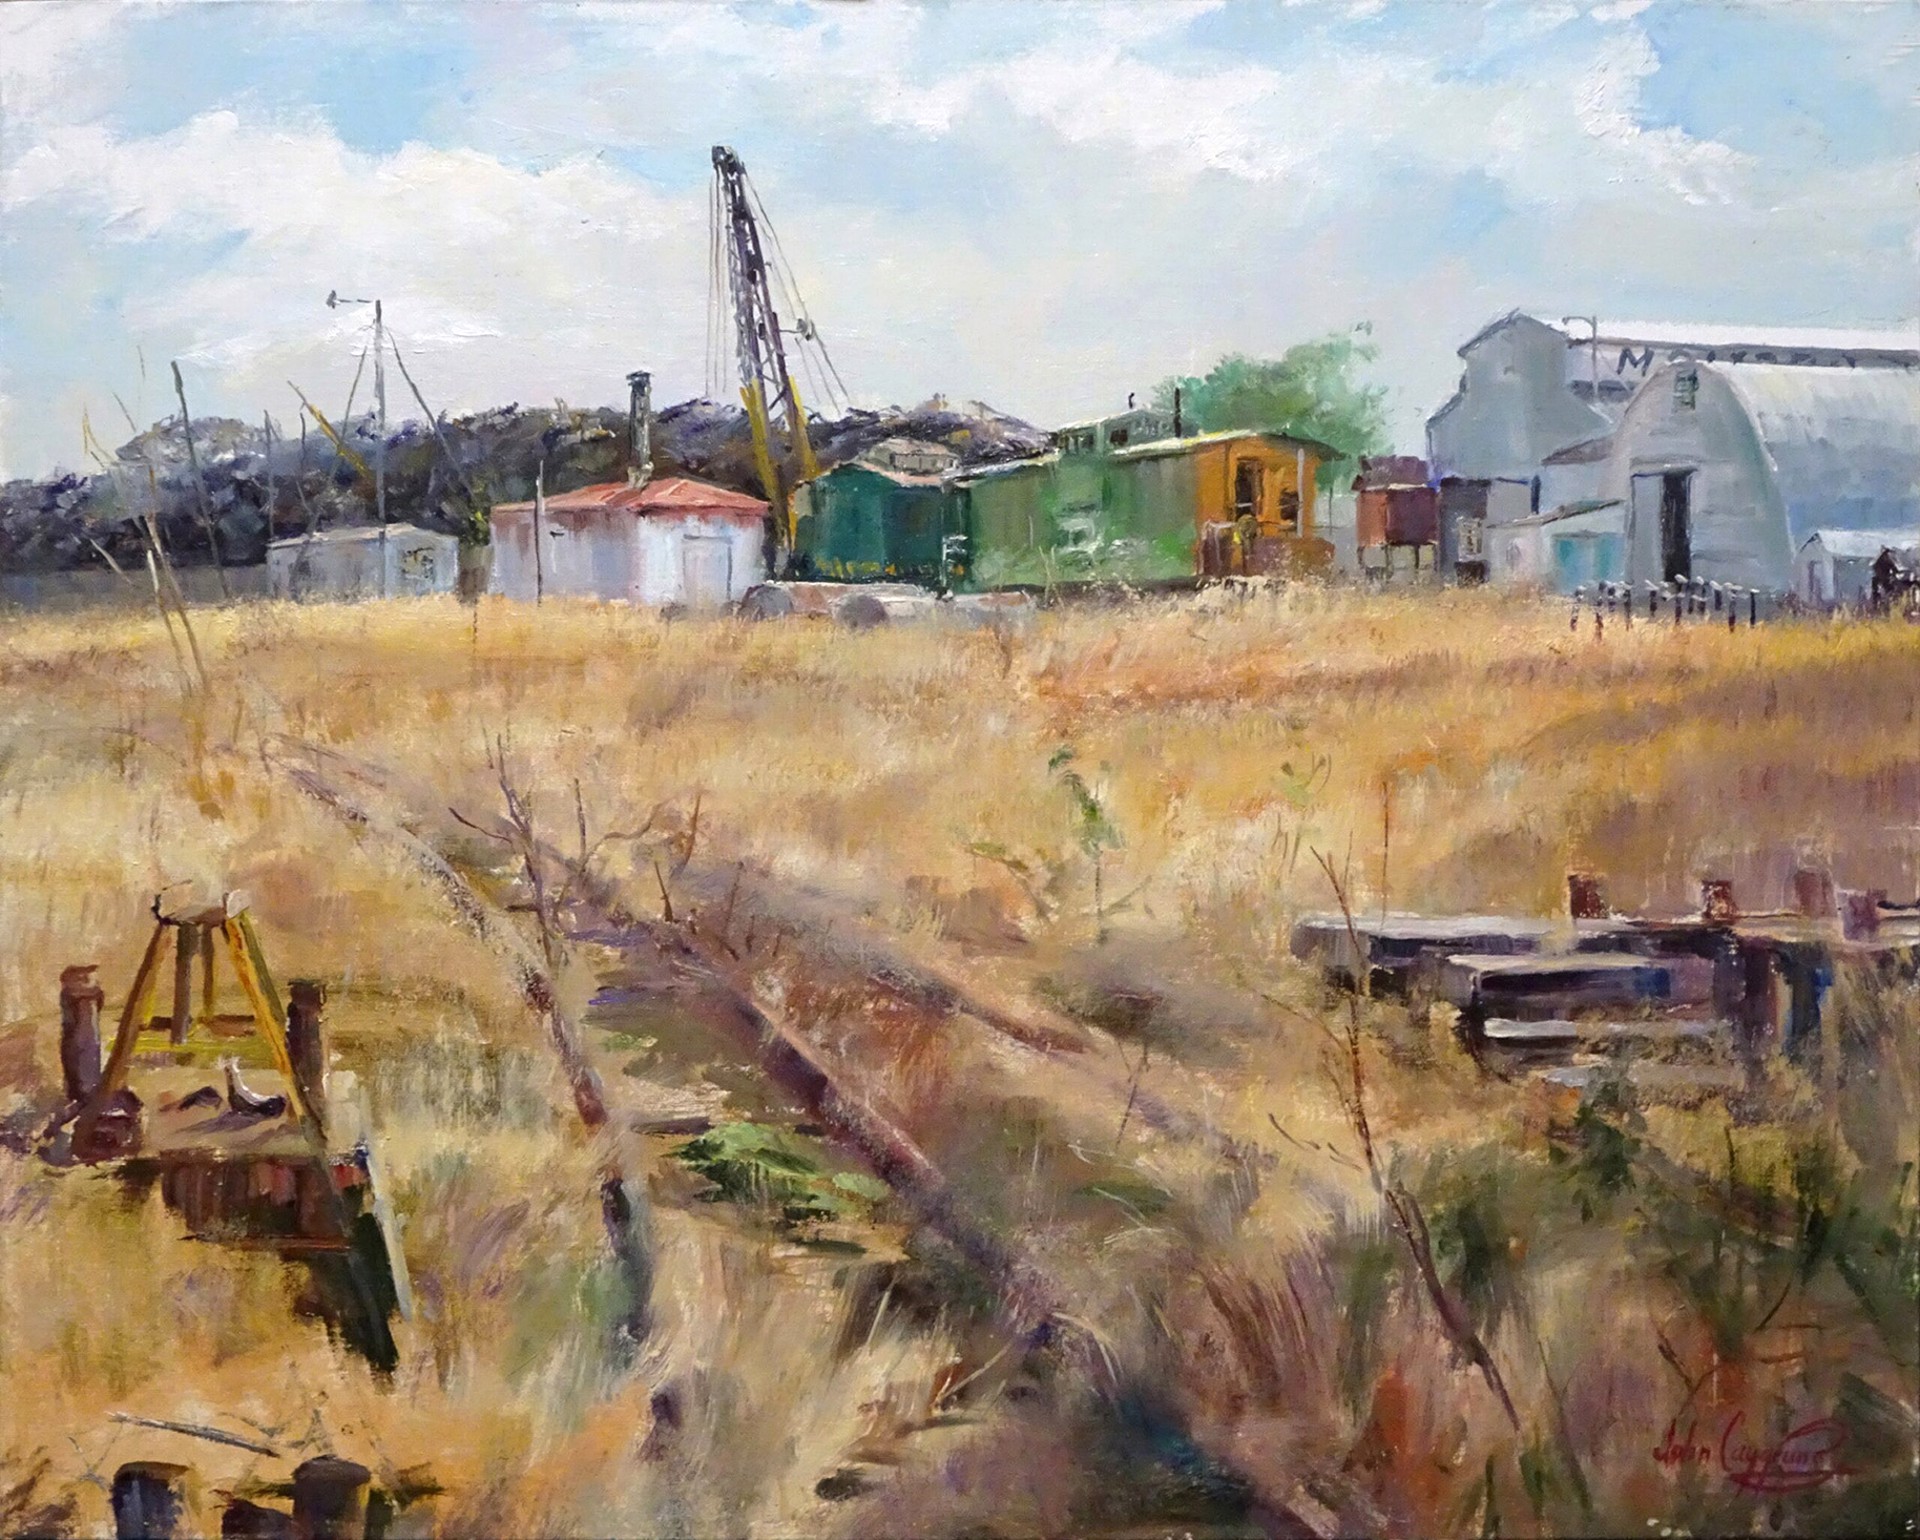 John Stephen Caggiano "In the Yards" by Oil Painters of America